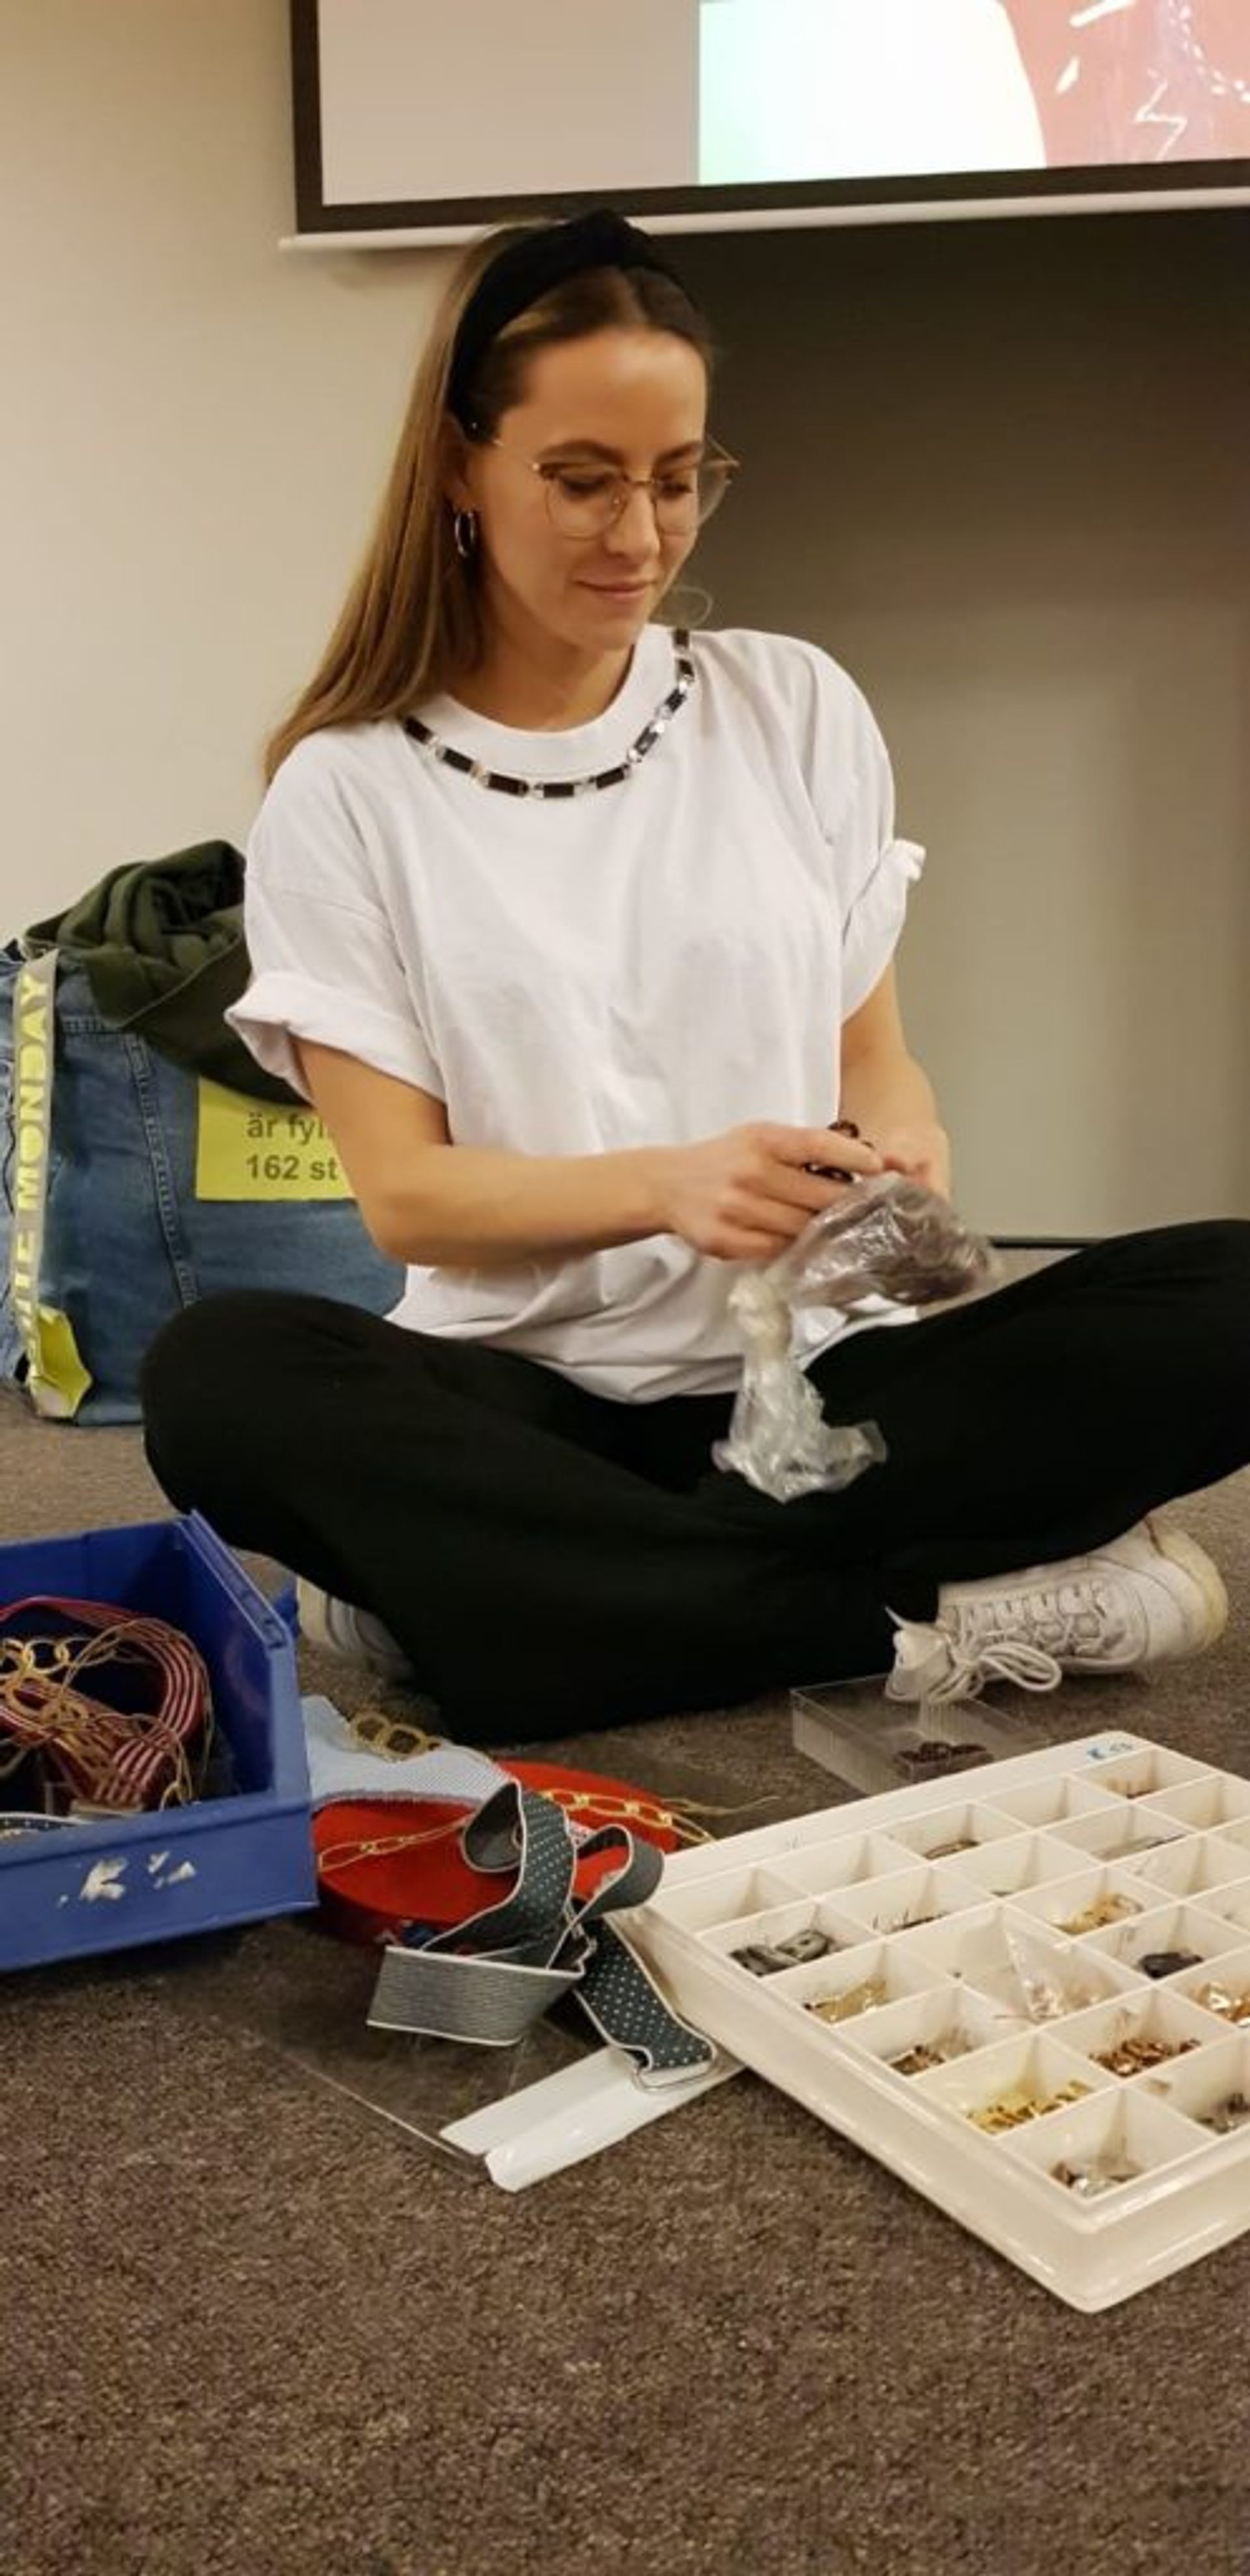 A student sitting on the floor mending clothes at the 2019 Hållbar student workshop.